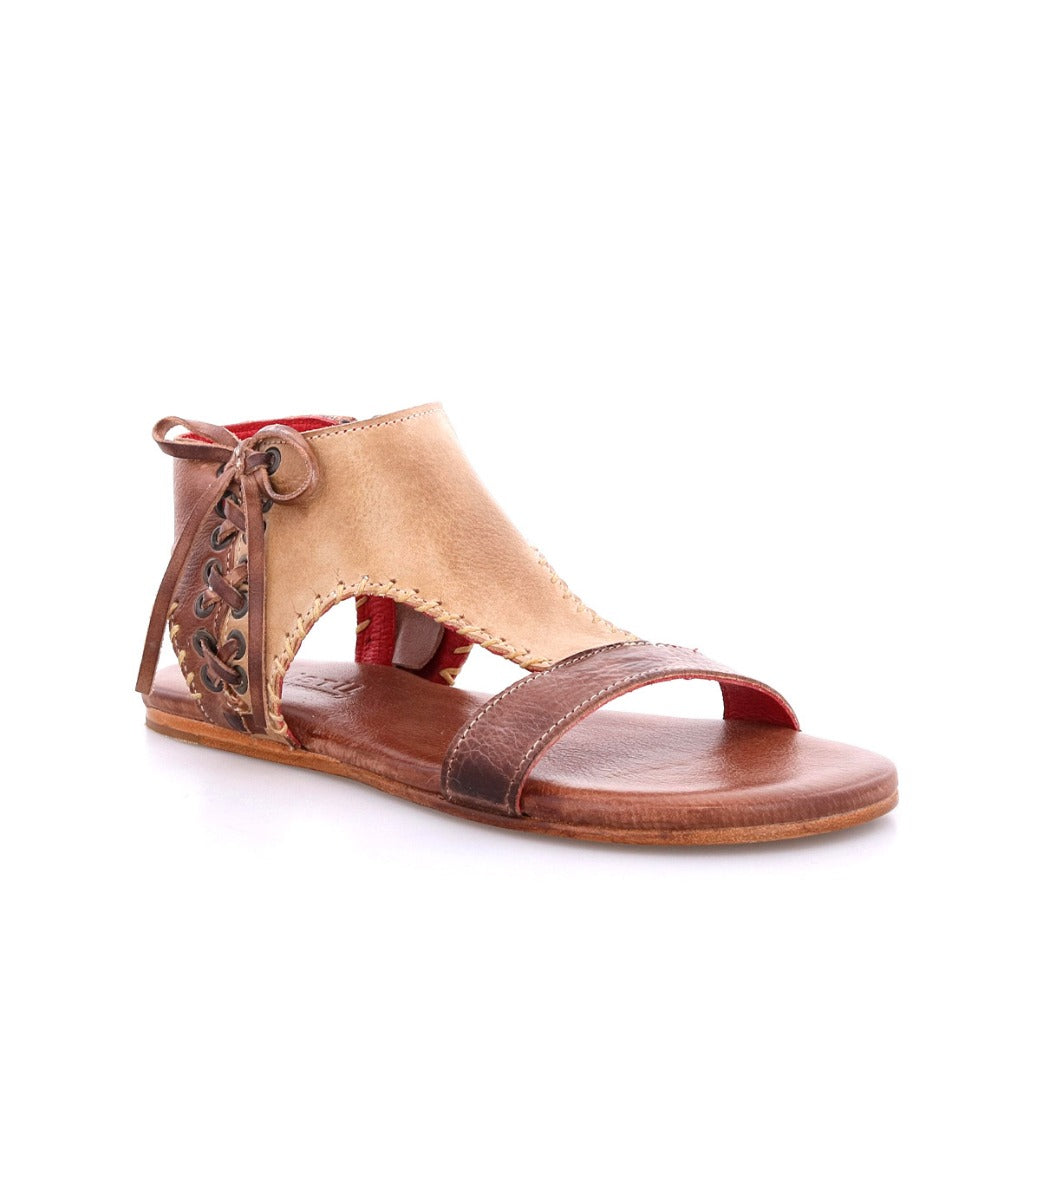 A women's Nina sandal with tan and brown straps by Bed Stu.